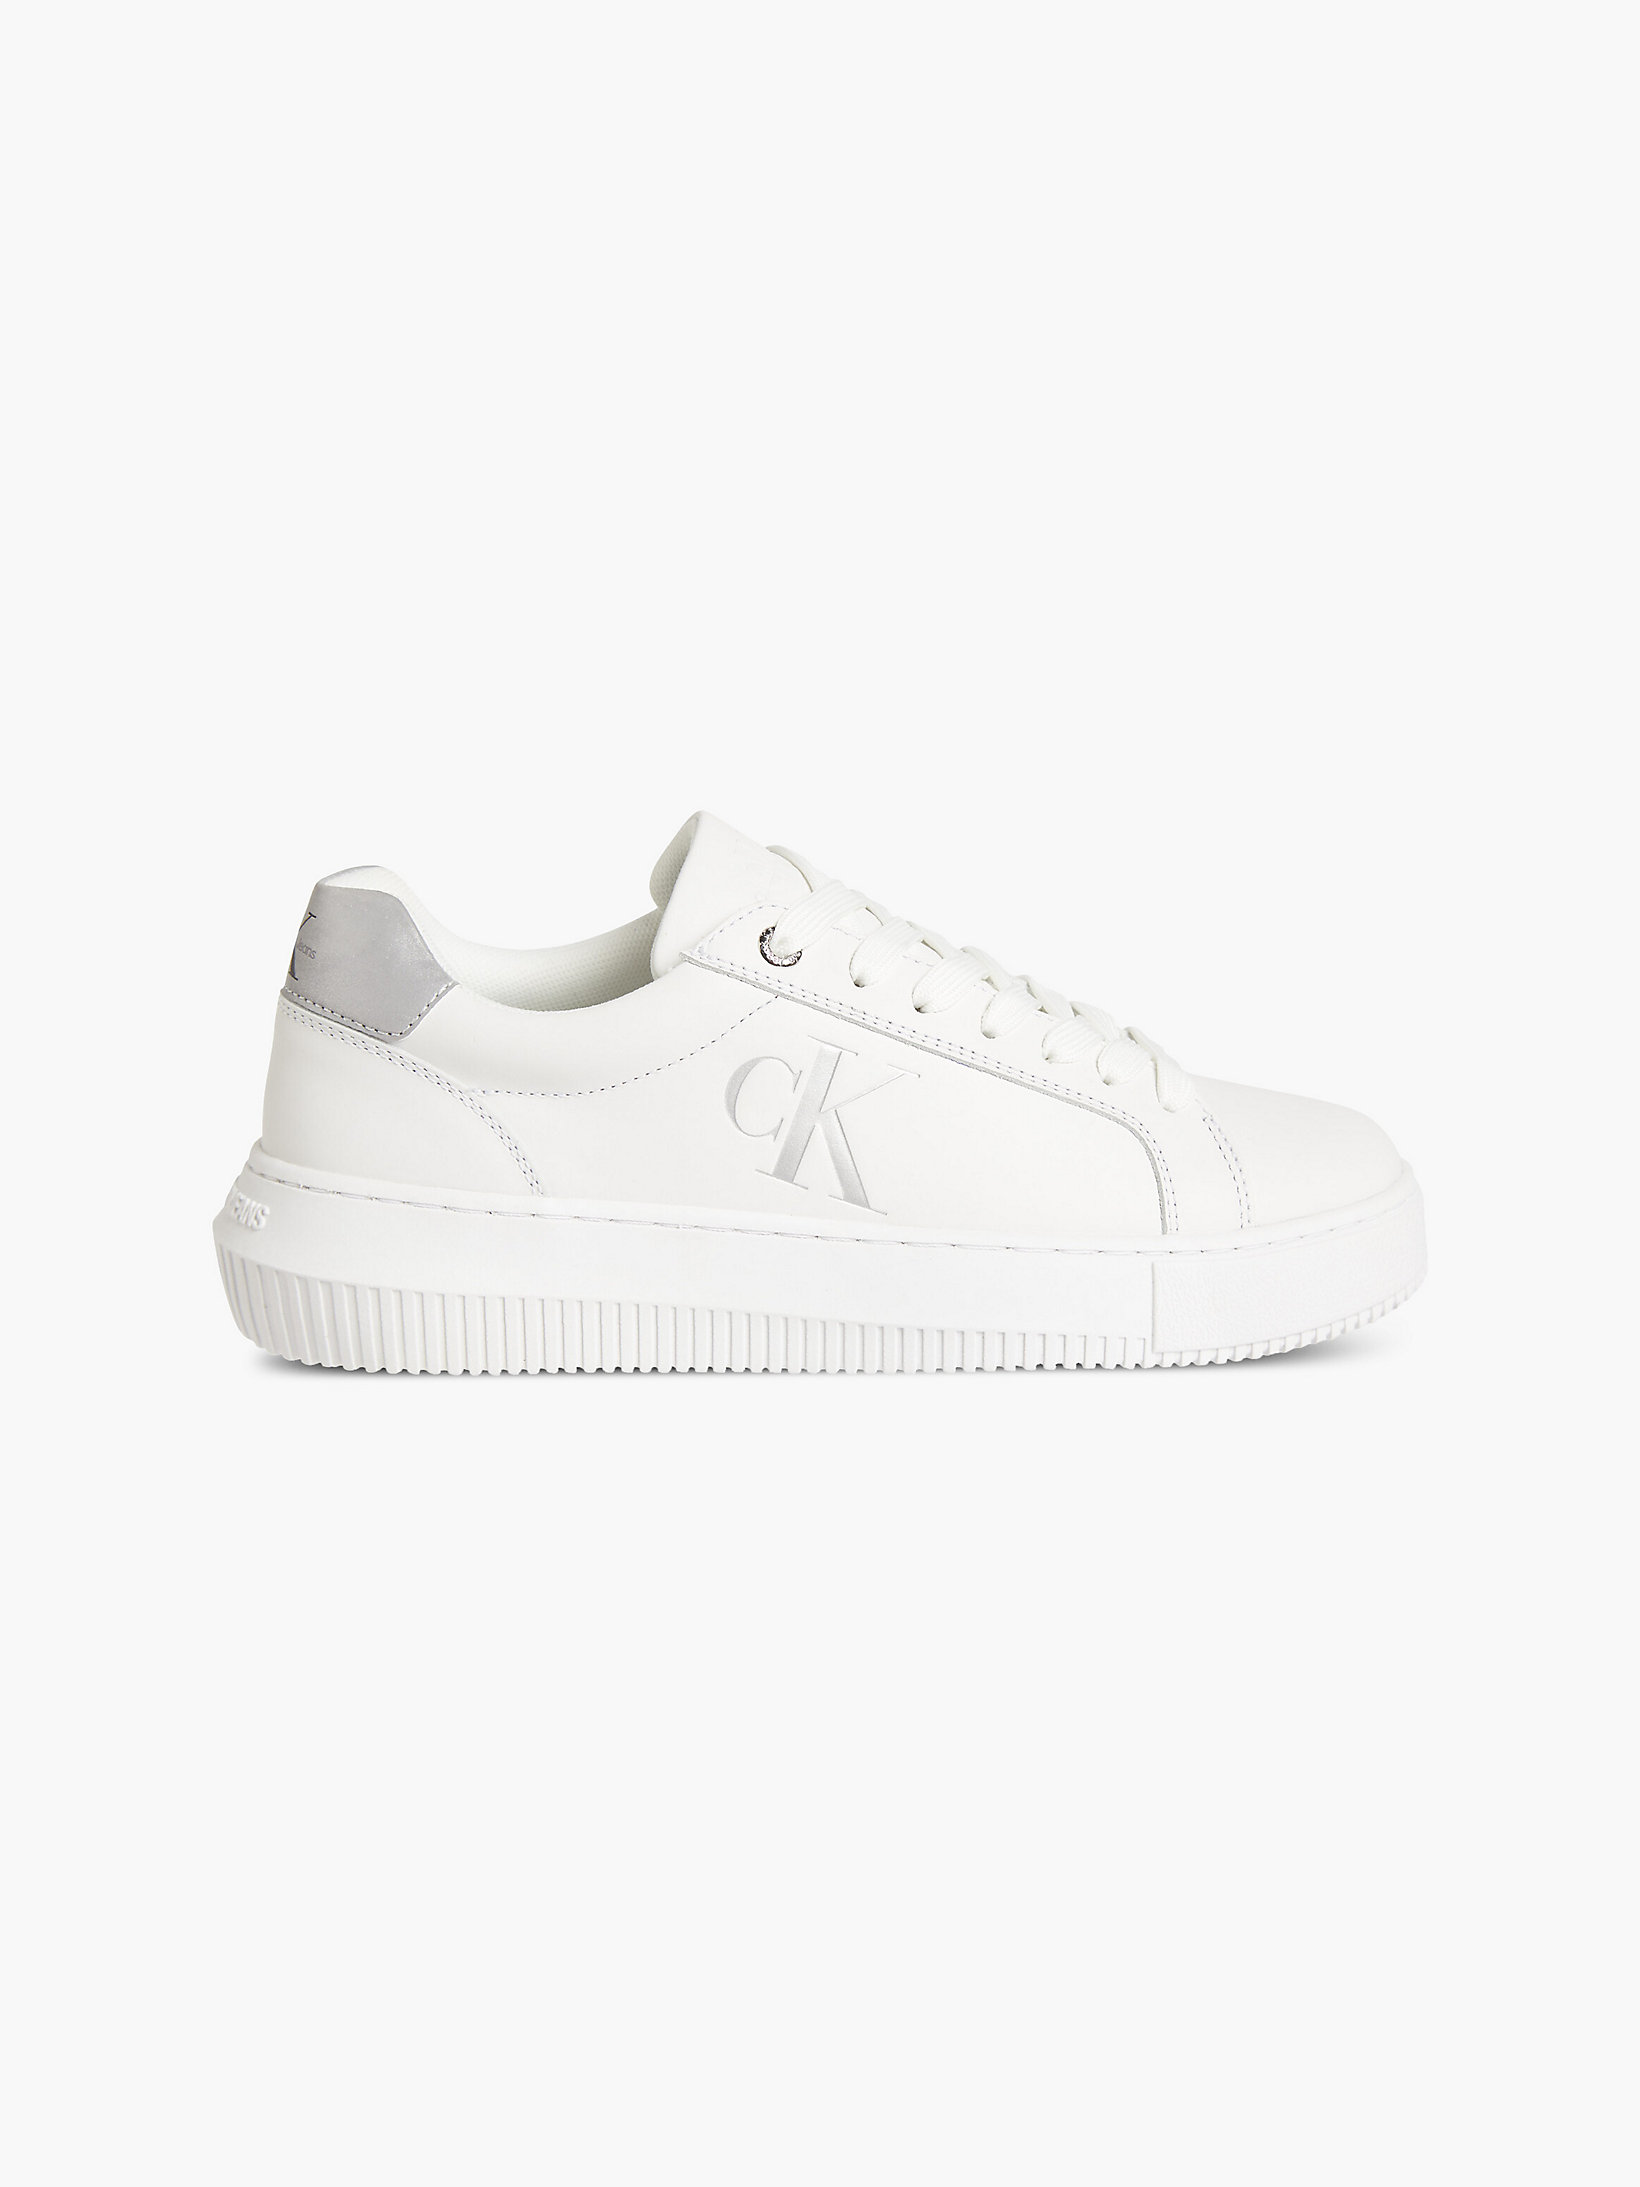 White/silver Leather Trainers undefined women Calvin Klein